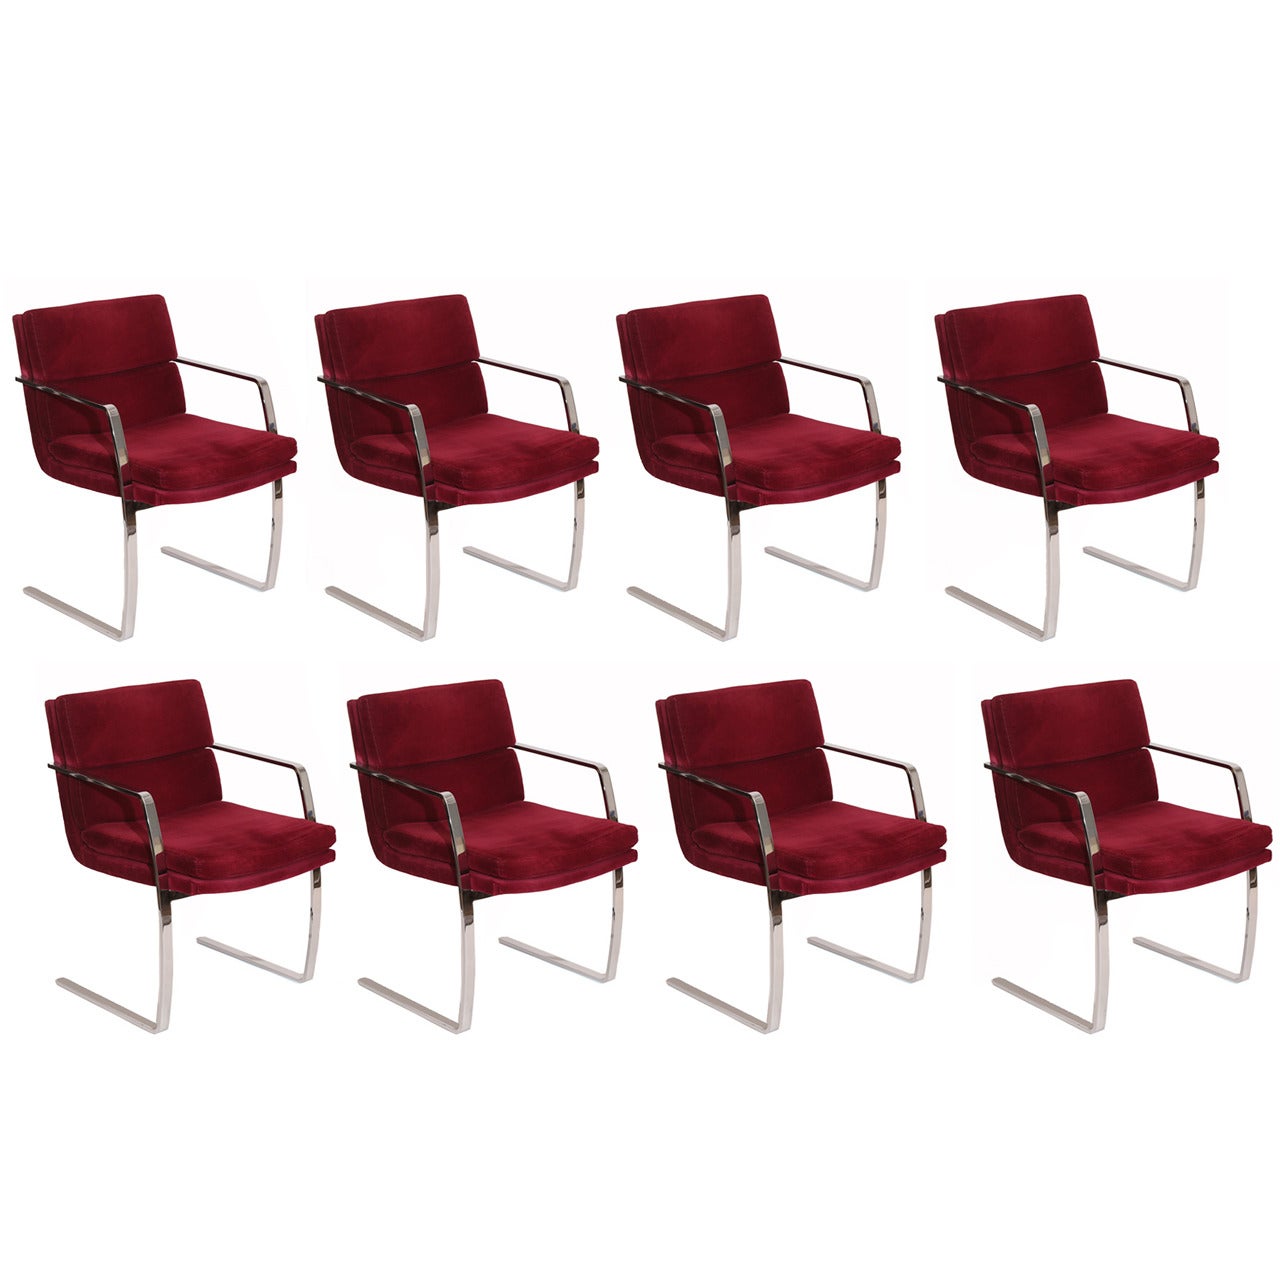 Eight Cantilevered Steel and Upholstered Dining or Conference Chairs